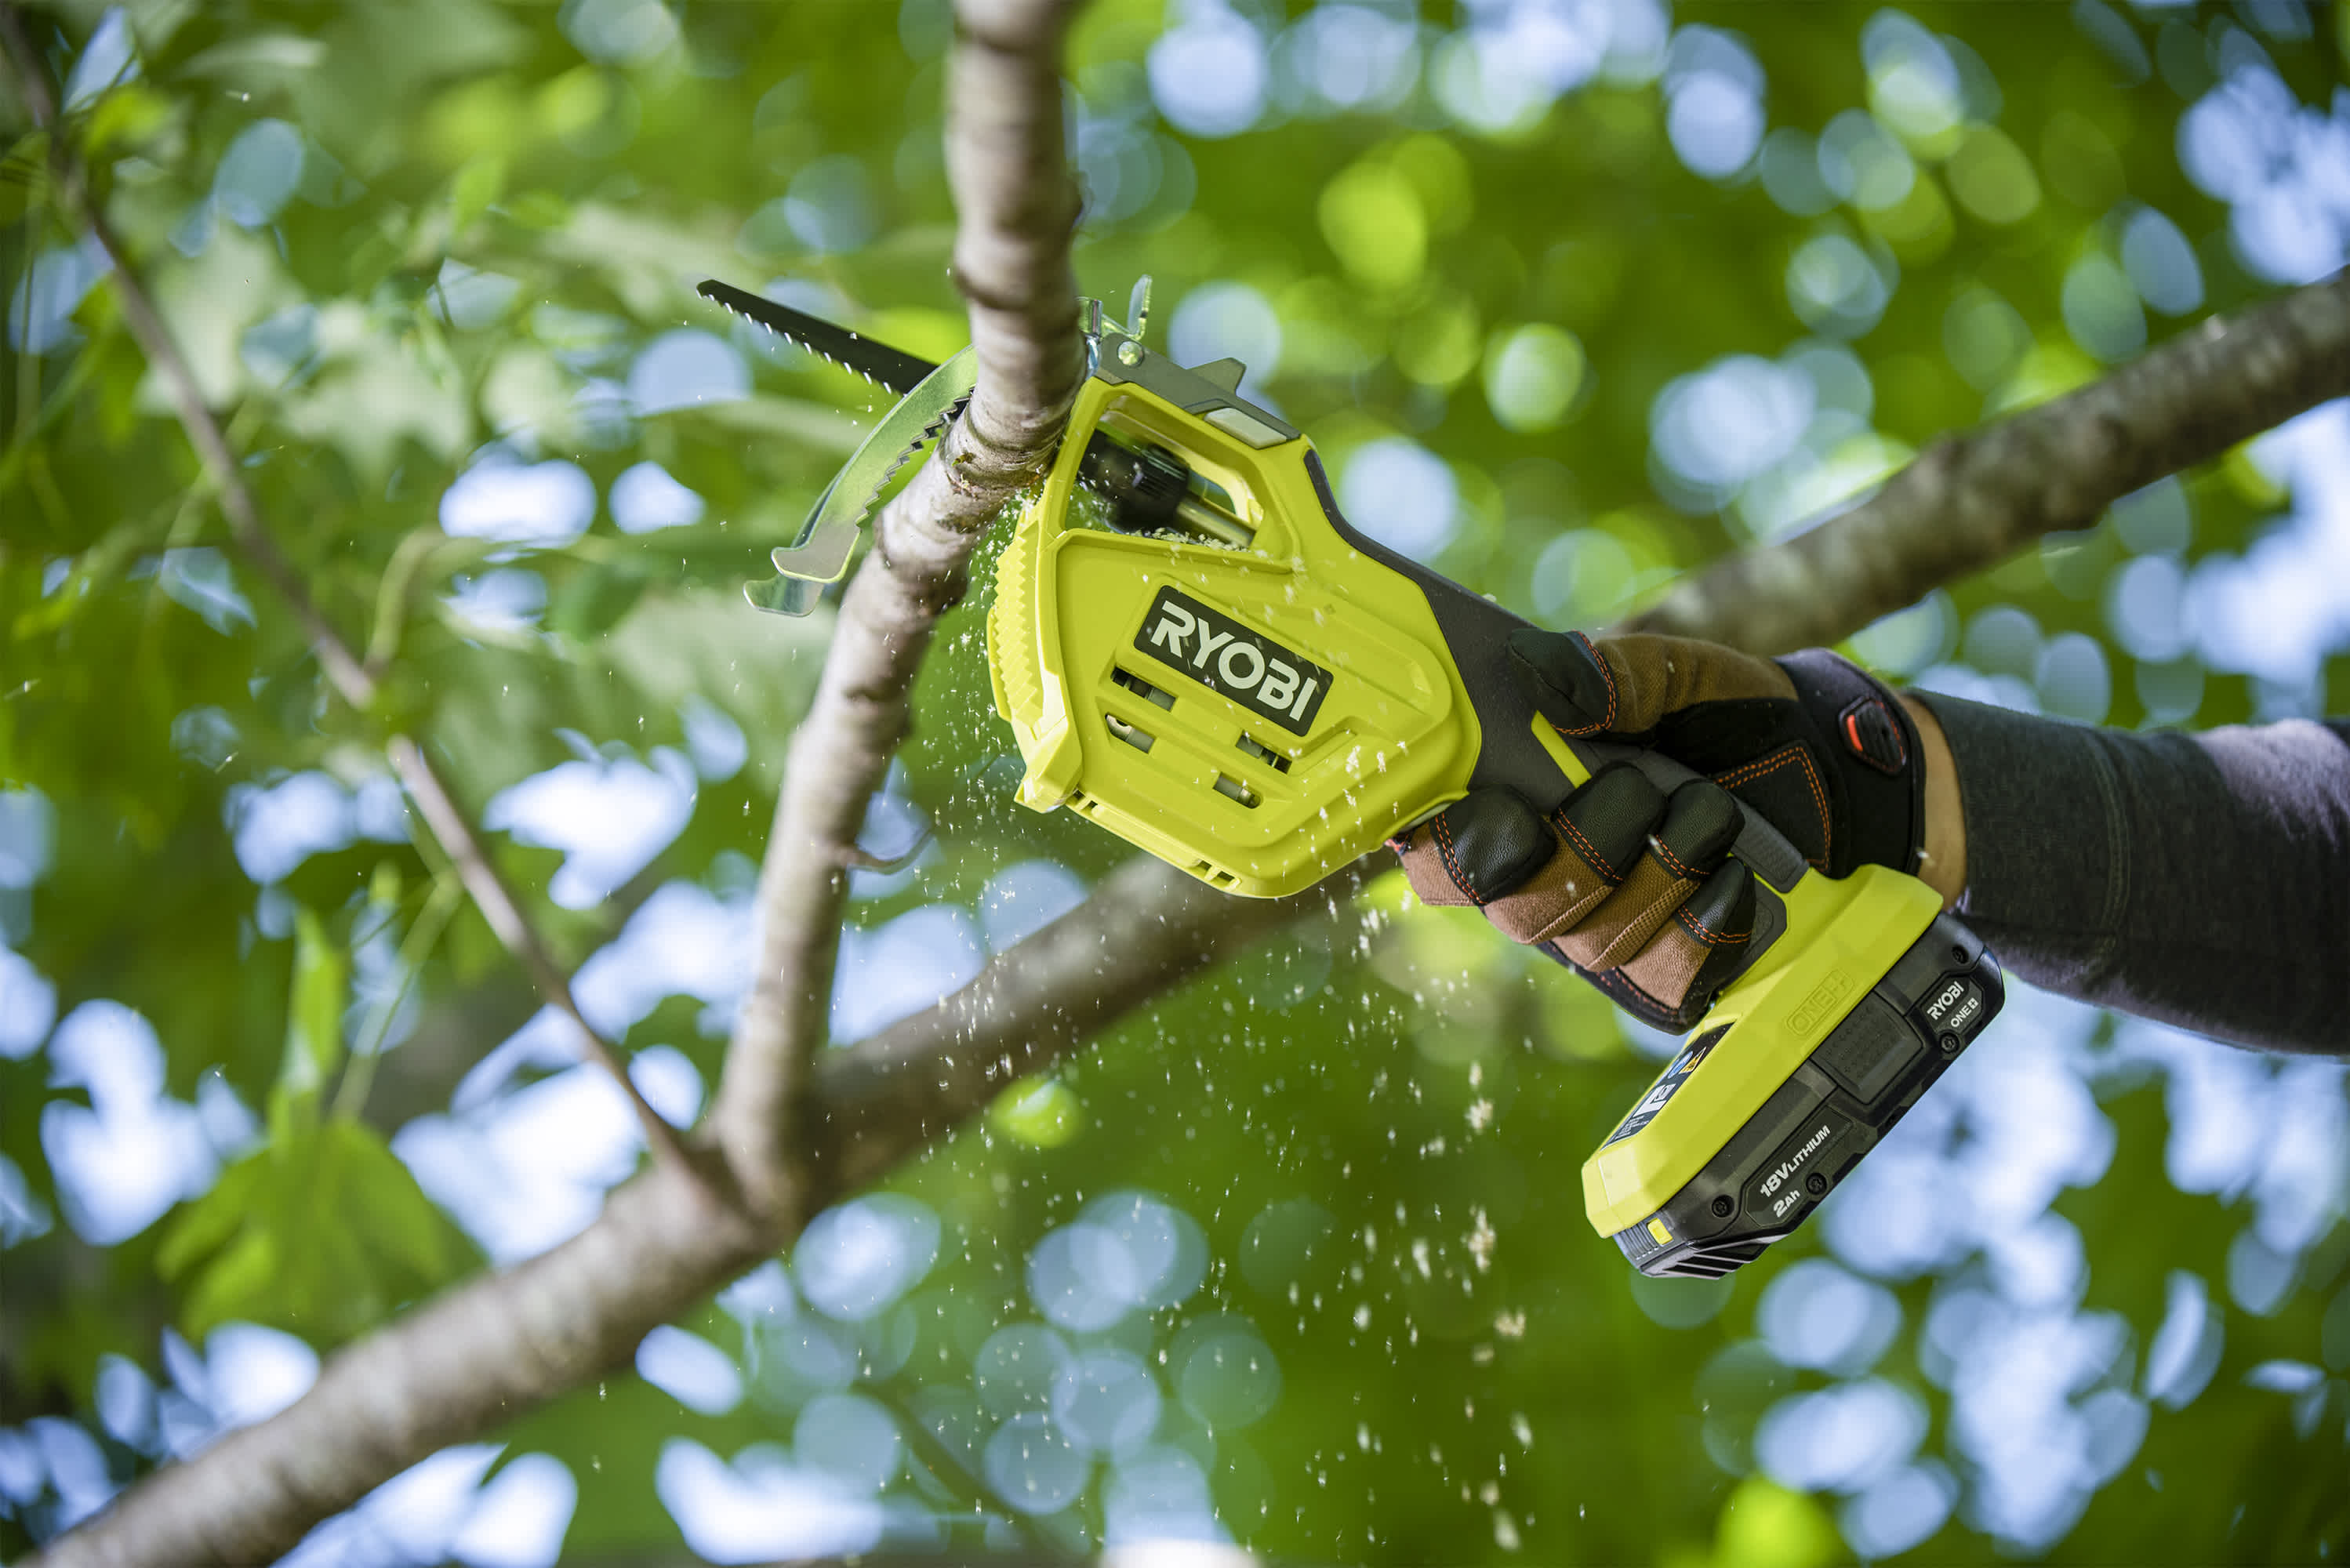 Product Features Image for 18V ONE+ ONE-HANDED PRUNING RECIPROCATING SAW KIT.